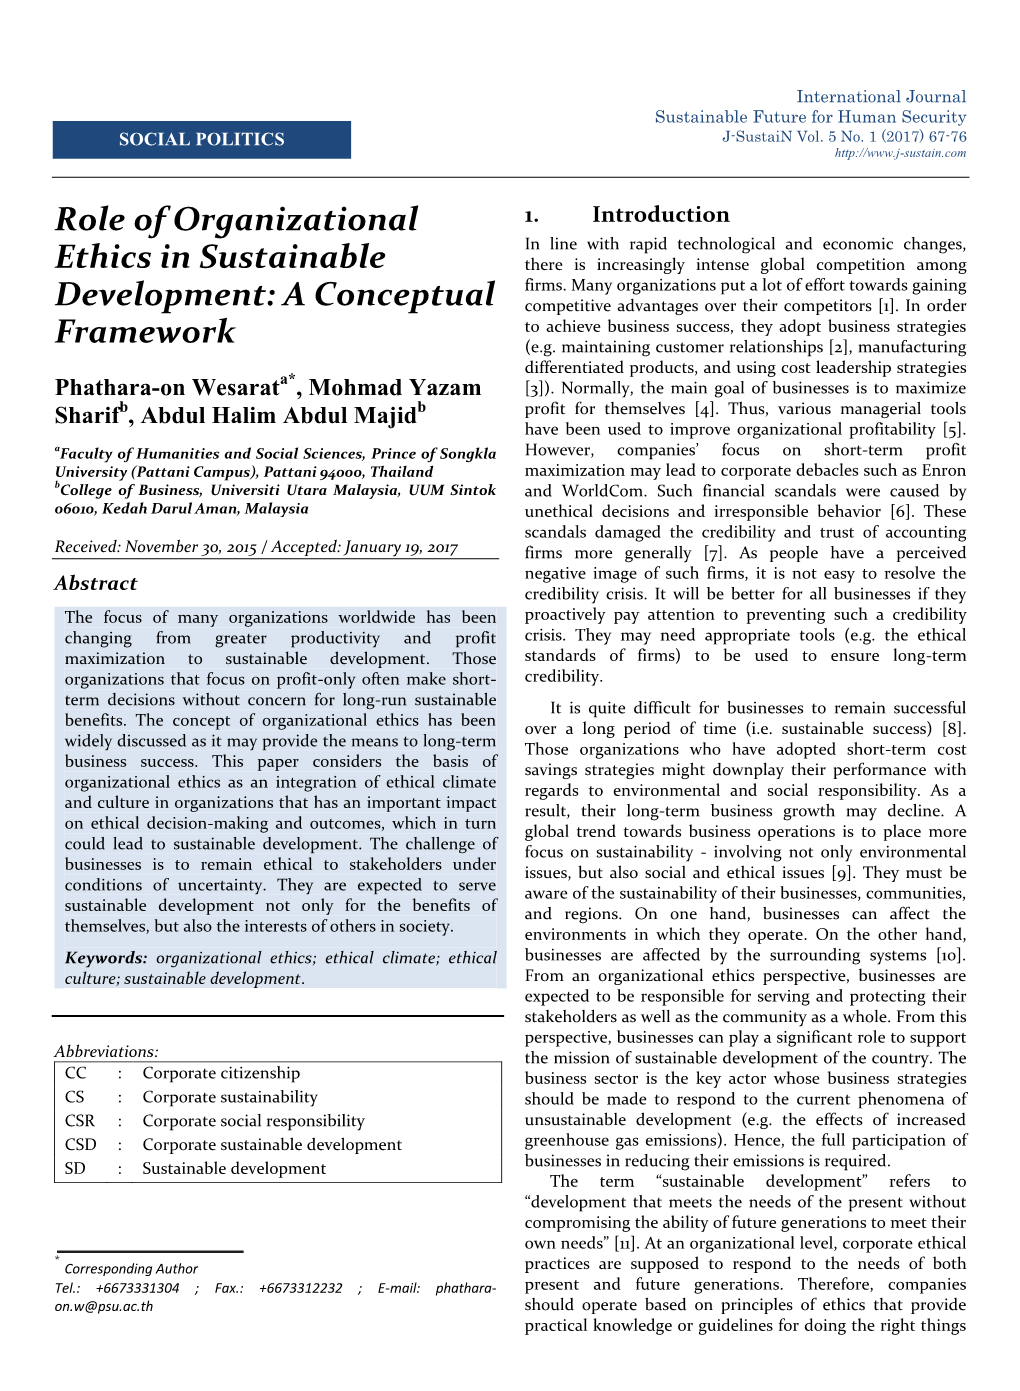 Role of Organizational Ethics in Sustainable Development